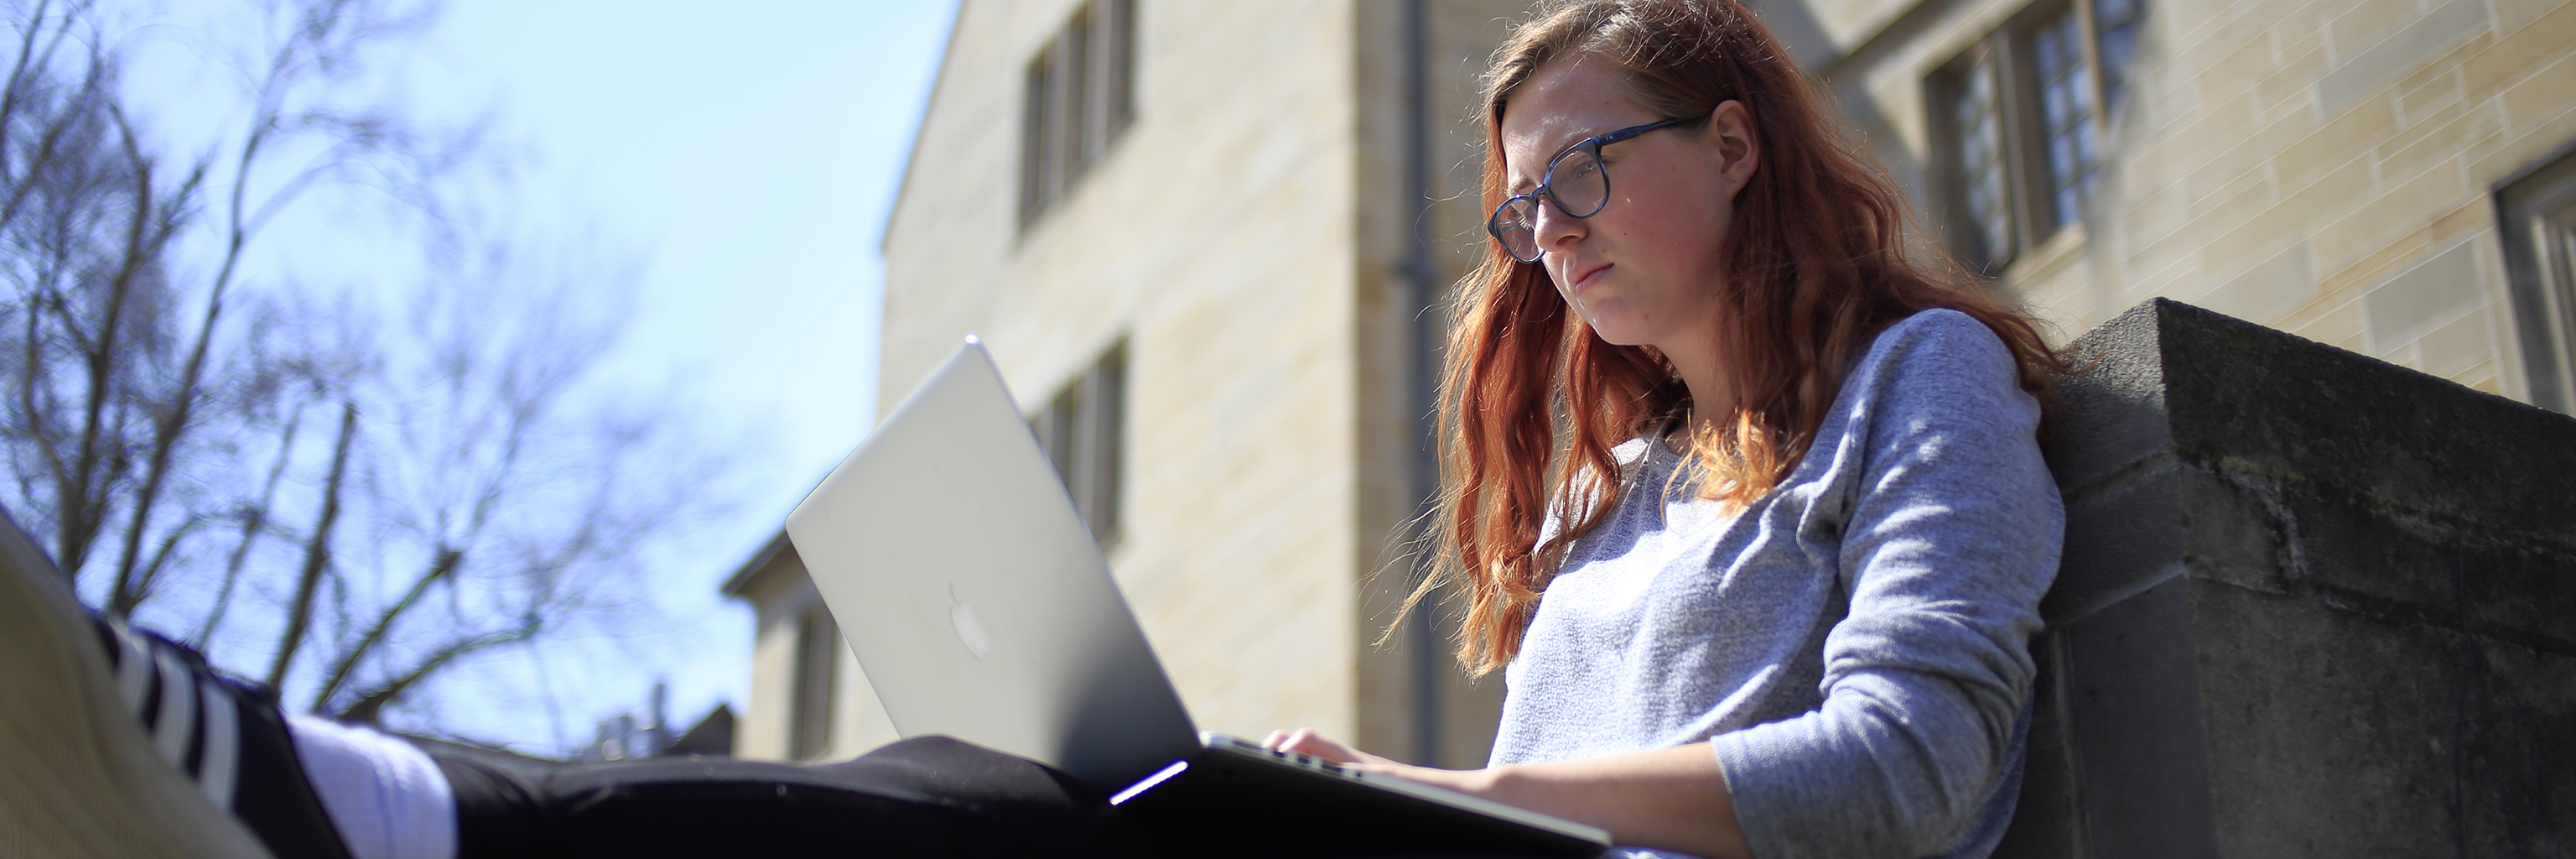 Indiana University student uses laptop outside an Indiana University Bloomington campus building.